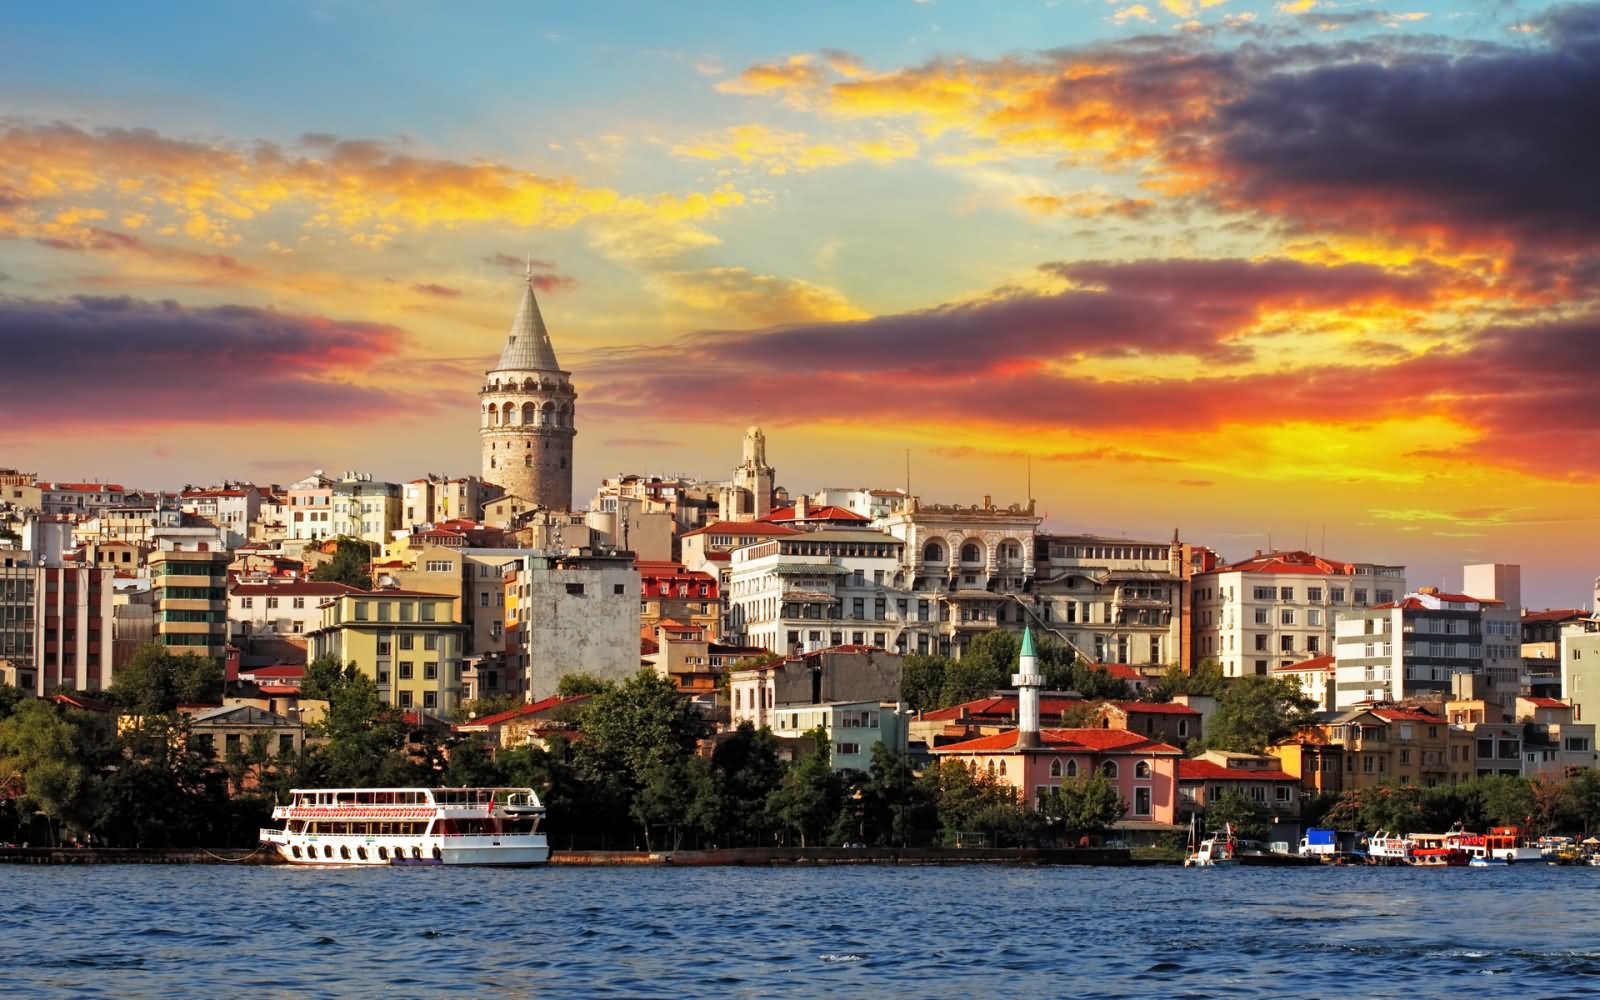 Adorable Sunset View Of The Galata Tower In Istanbul